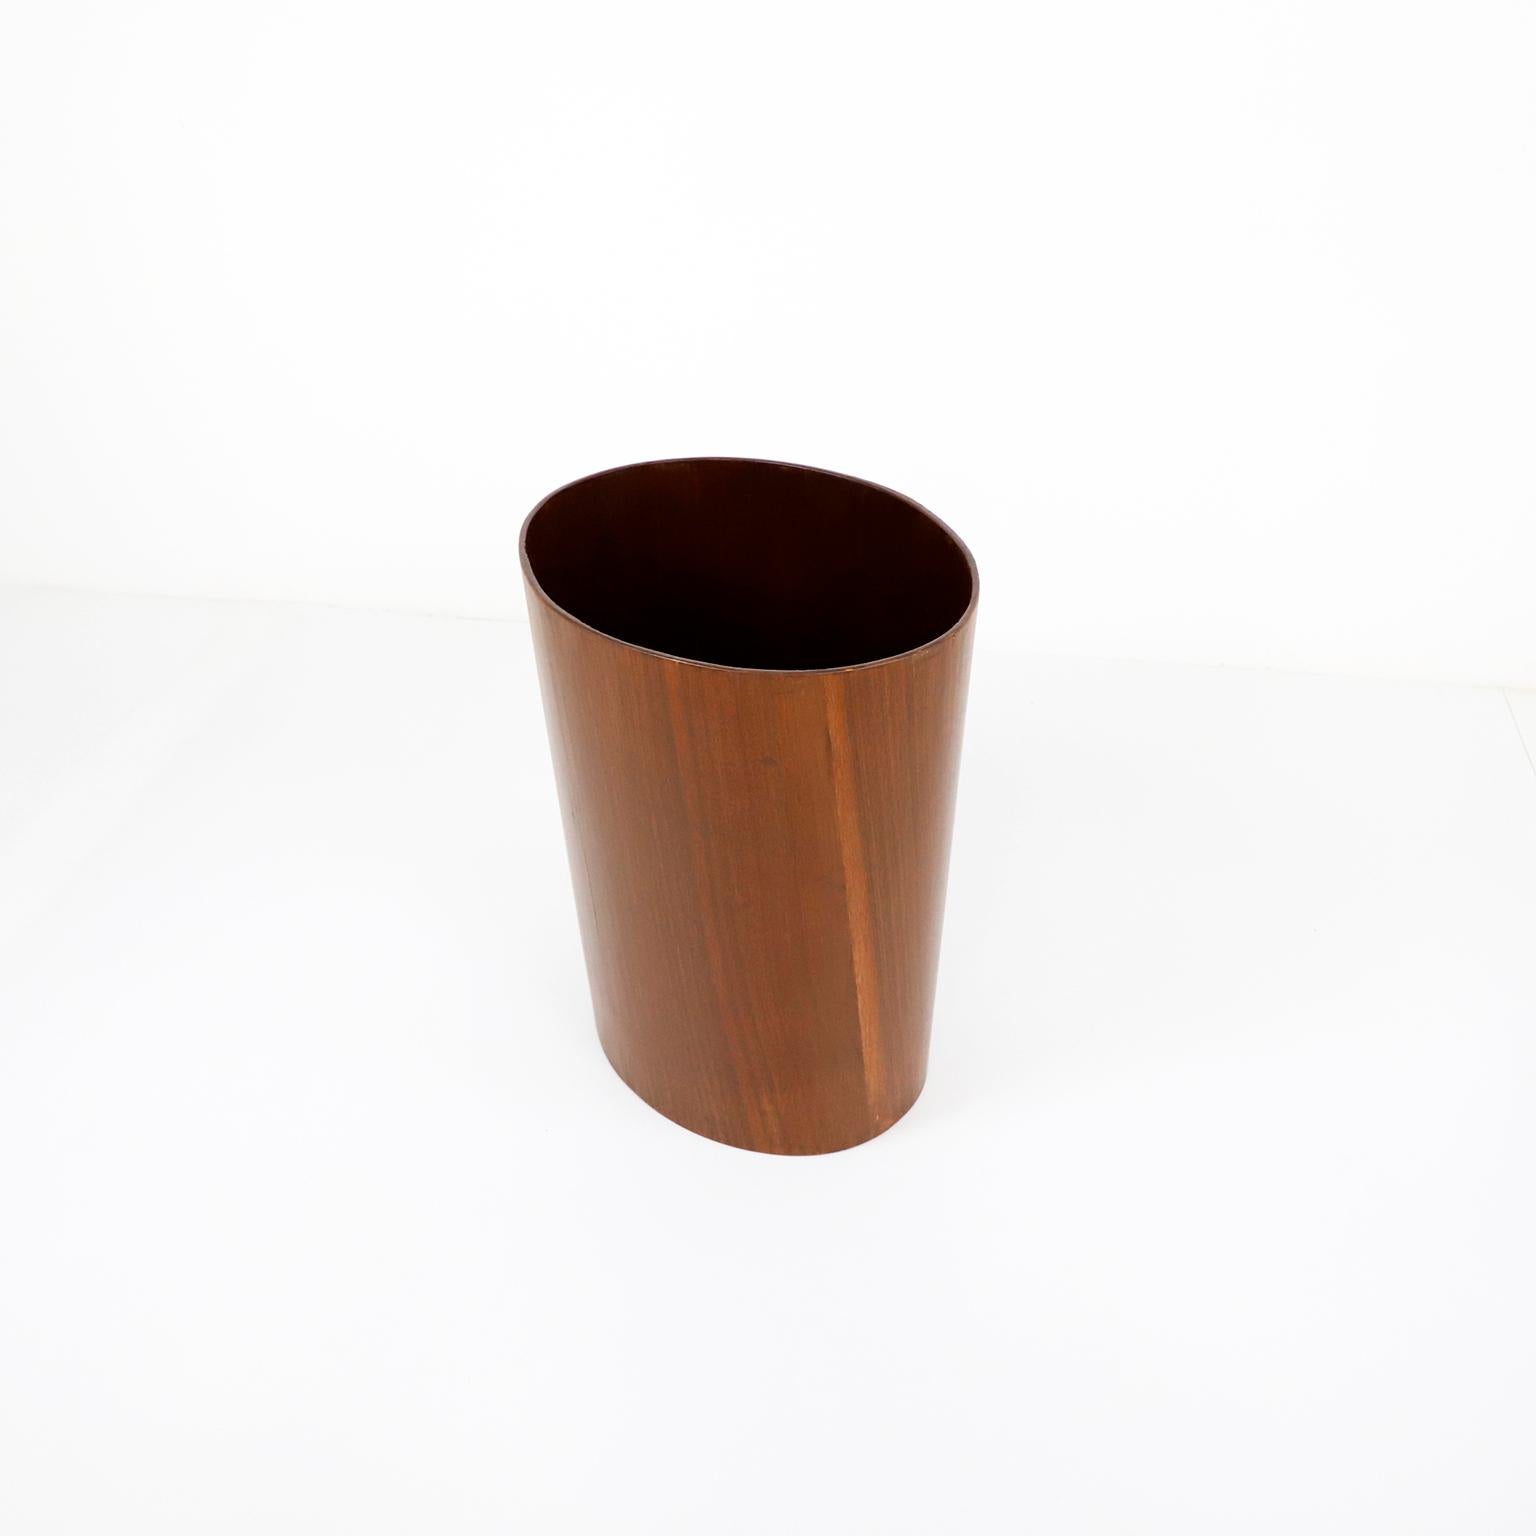 Circa 1960, We offer this mid century Mahogany Plywood trash can. Recently restored.